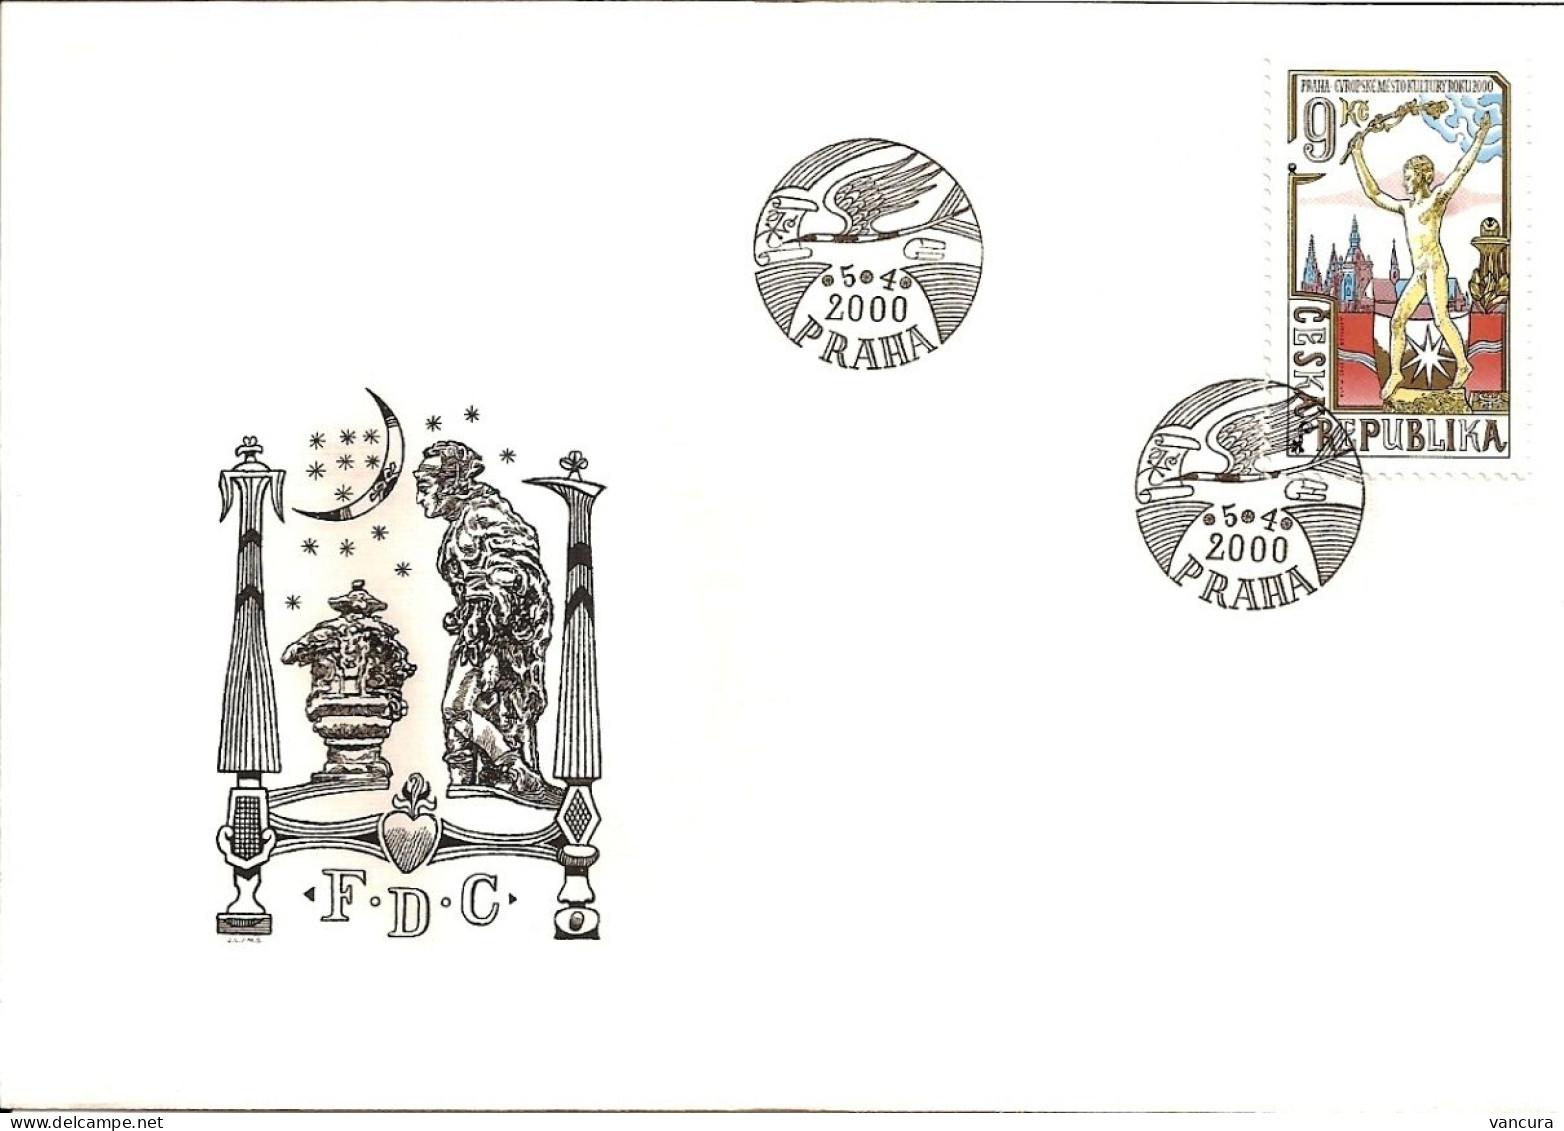 FDC 250-2 Czech Republic Prague, European City Of Culture 2000 NOTICE POOR SCANS, BUT THE FDC'S ARE PERFECT. - Beeldhouwkunst